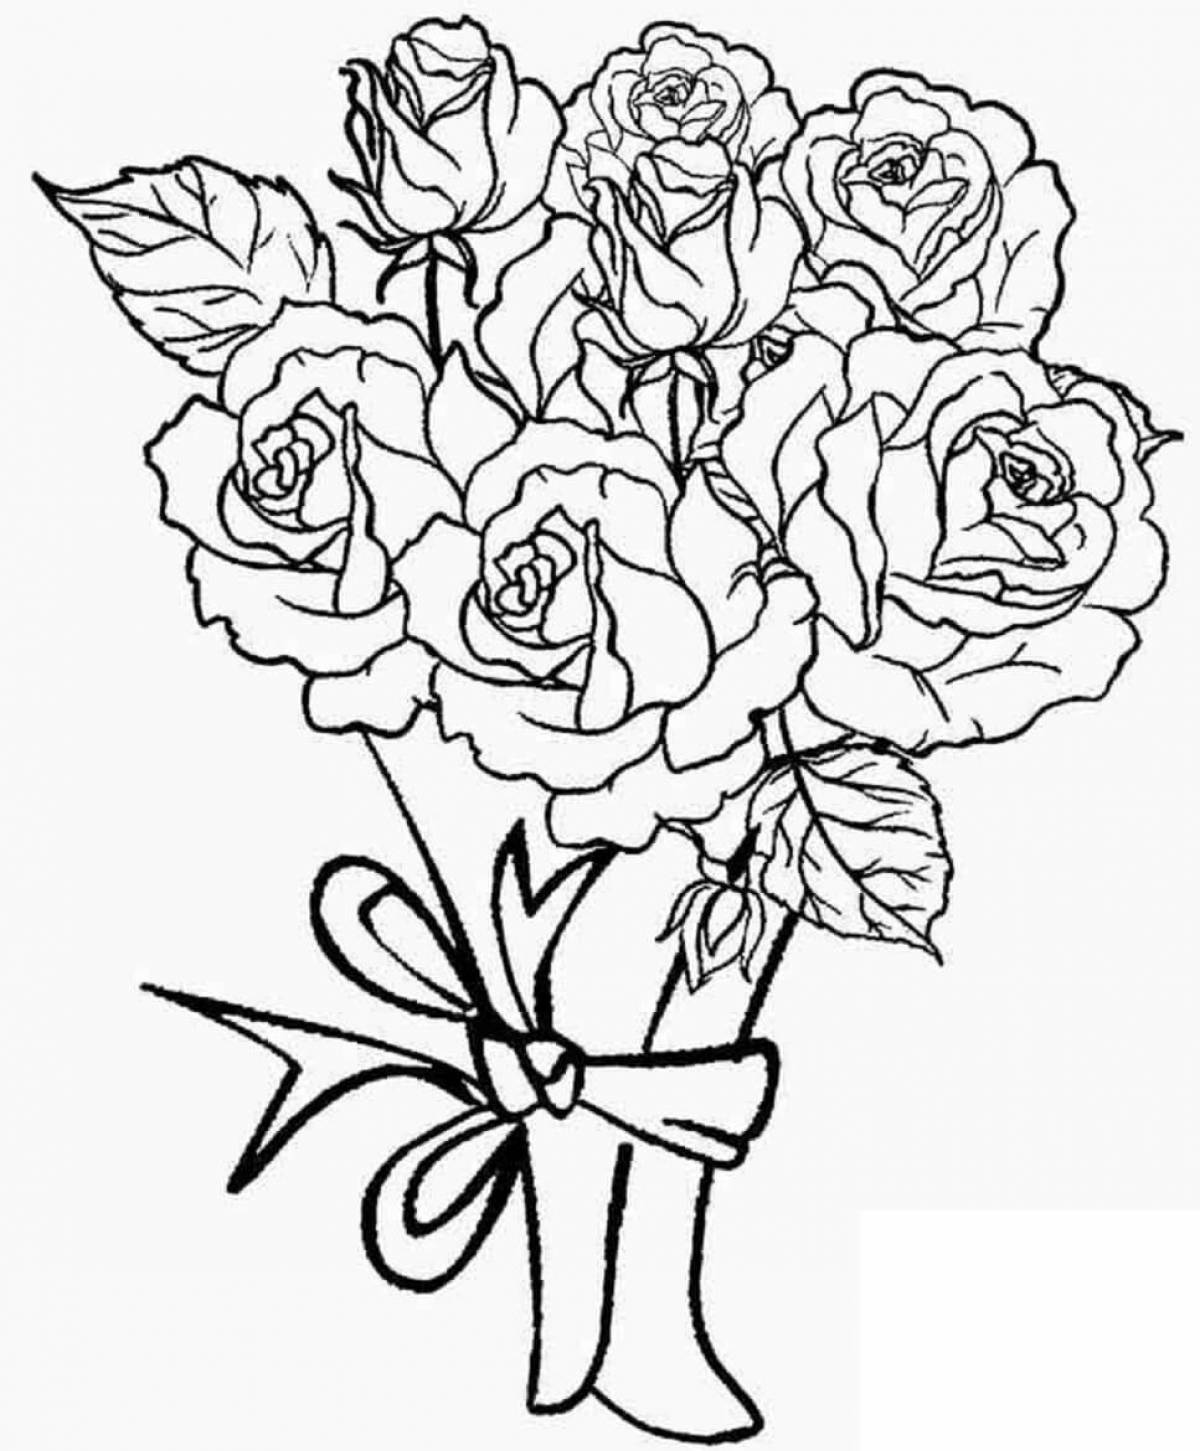 Coloring roses for children 5-6 years old